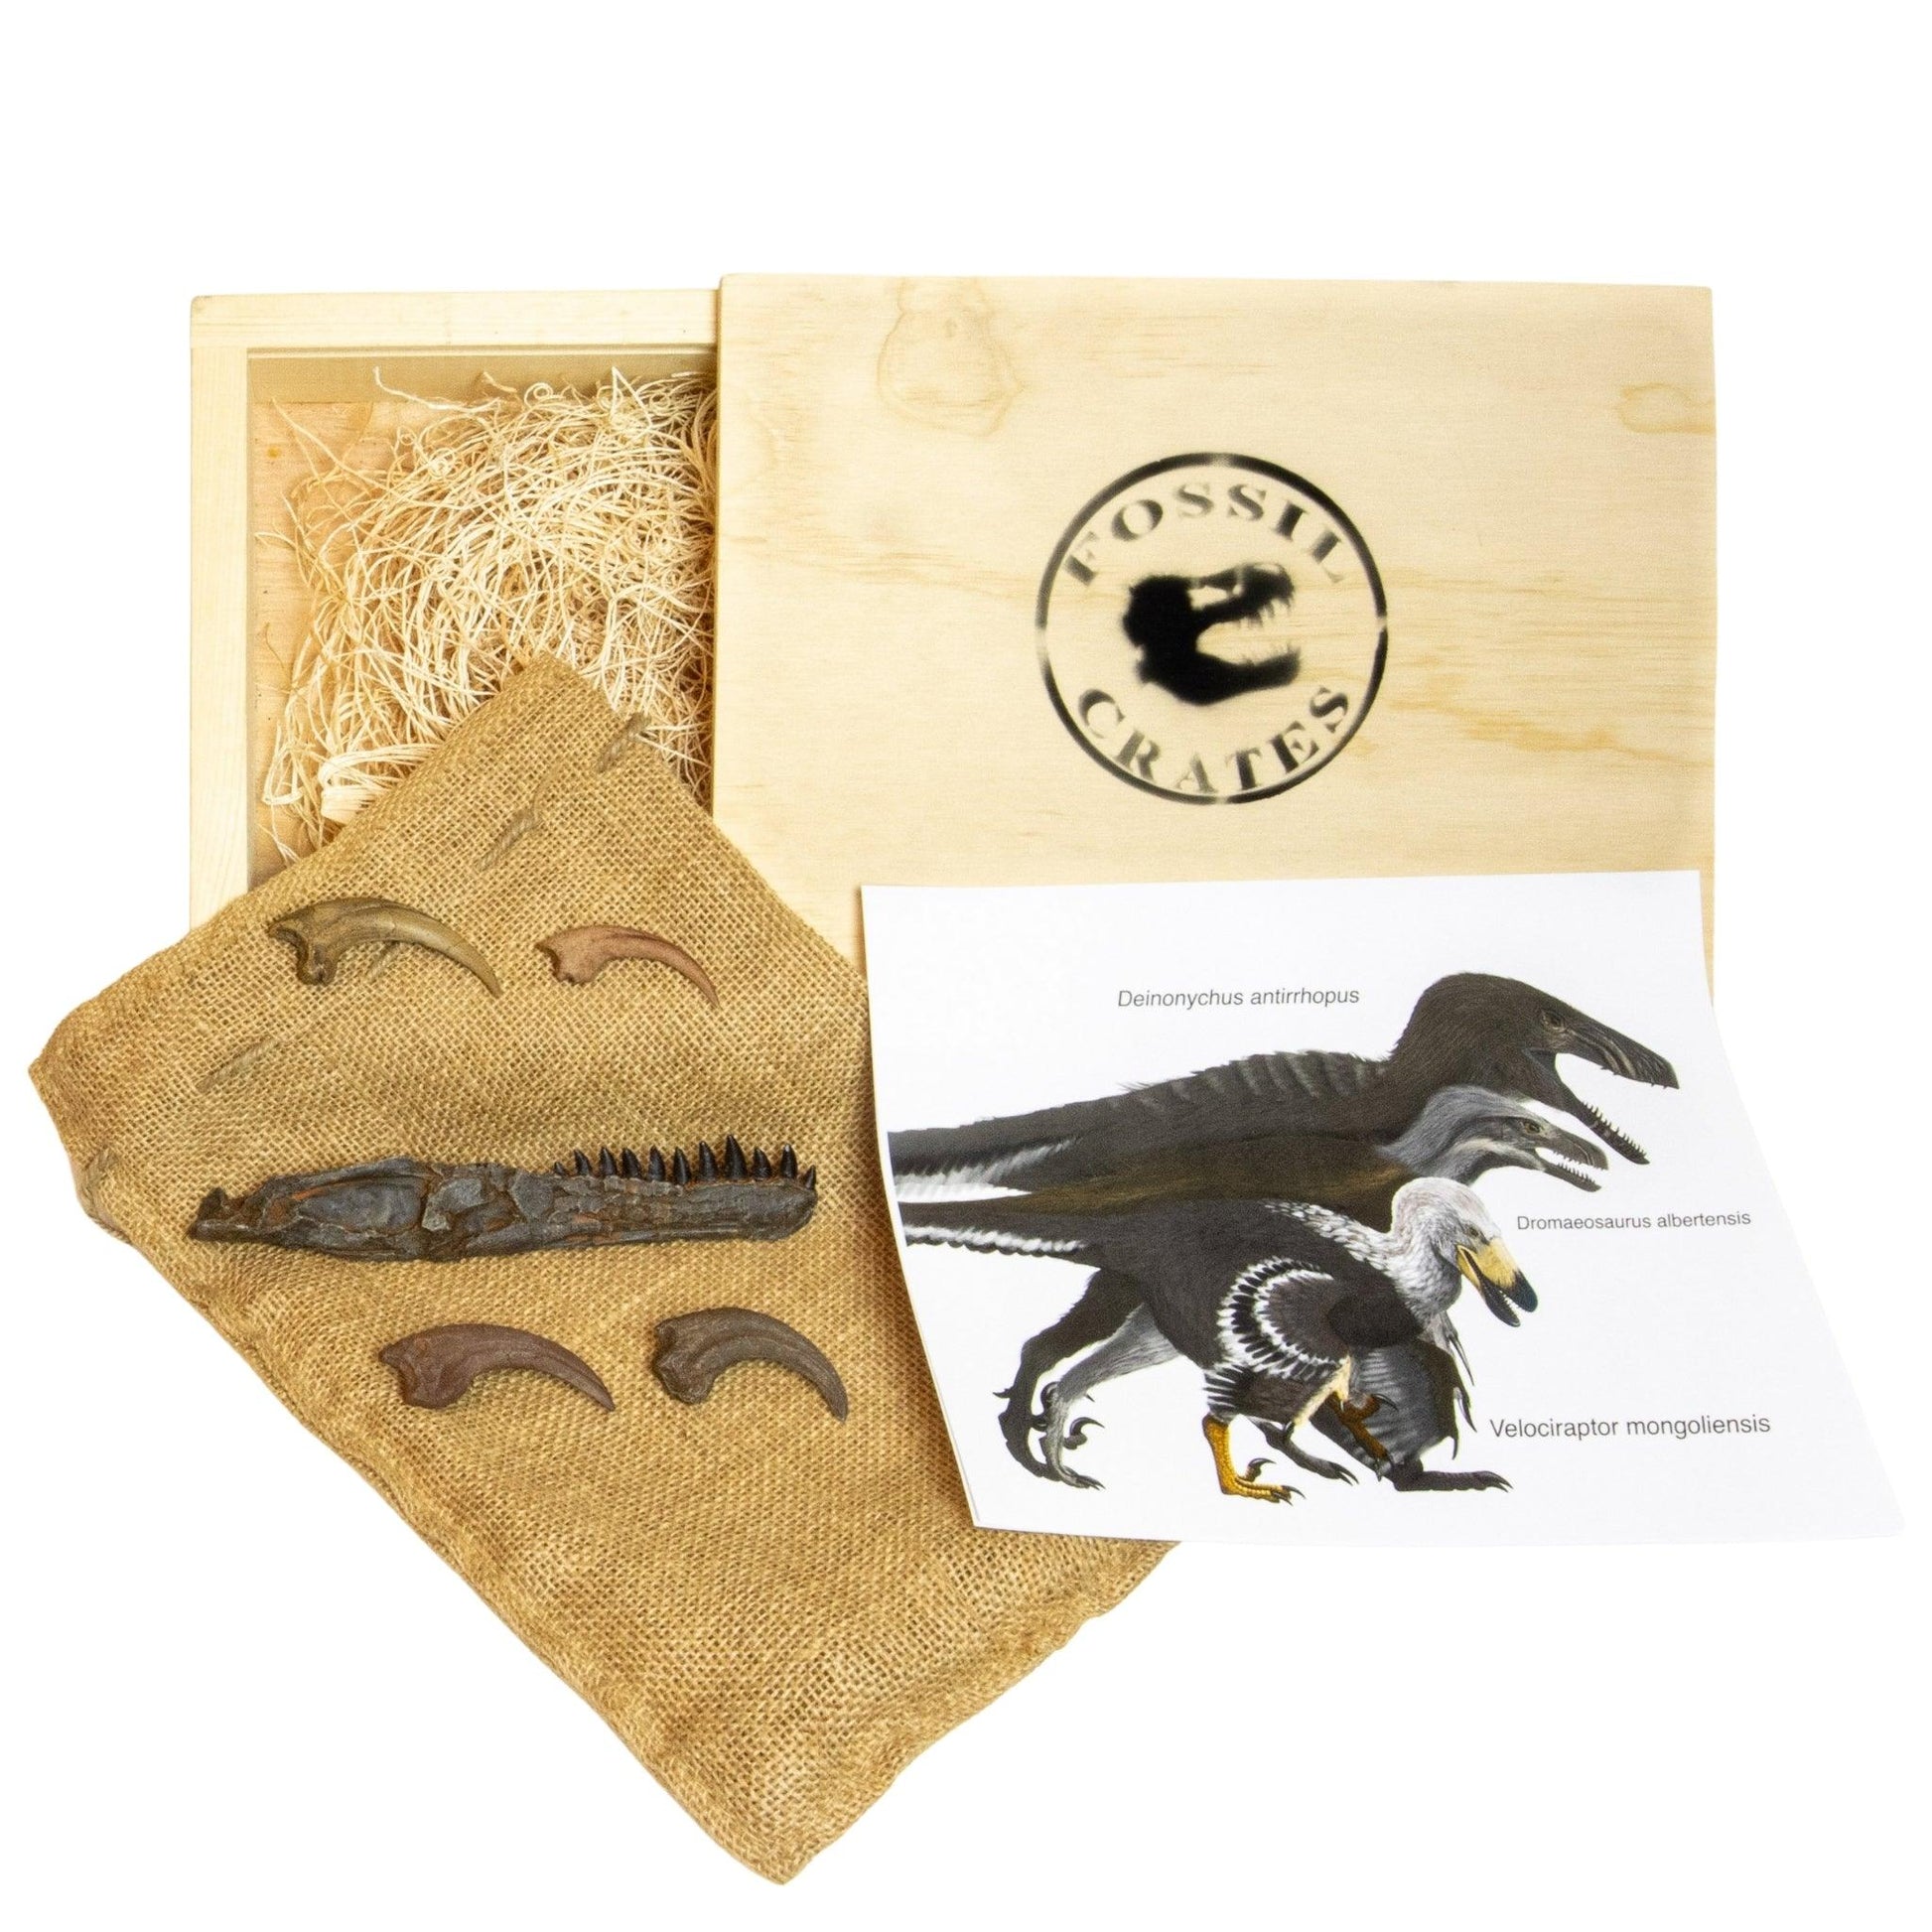 Dromaeosaurus, Deinonychus, and Velociraptor claw and jaw casts with paleoart in Ultimate Raptor Wooden Crate